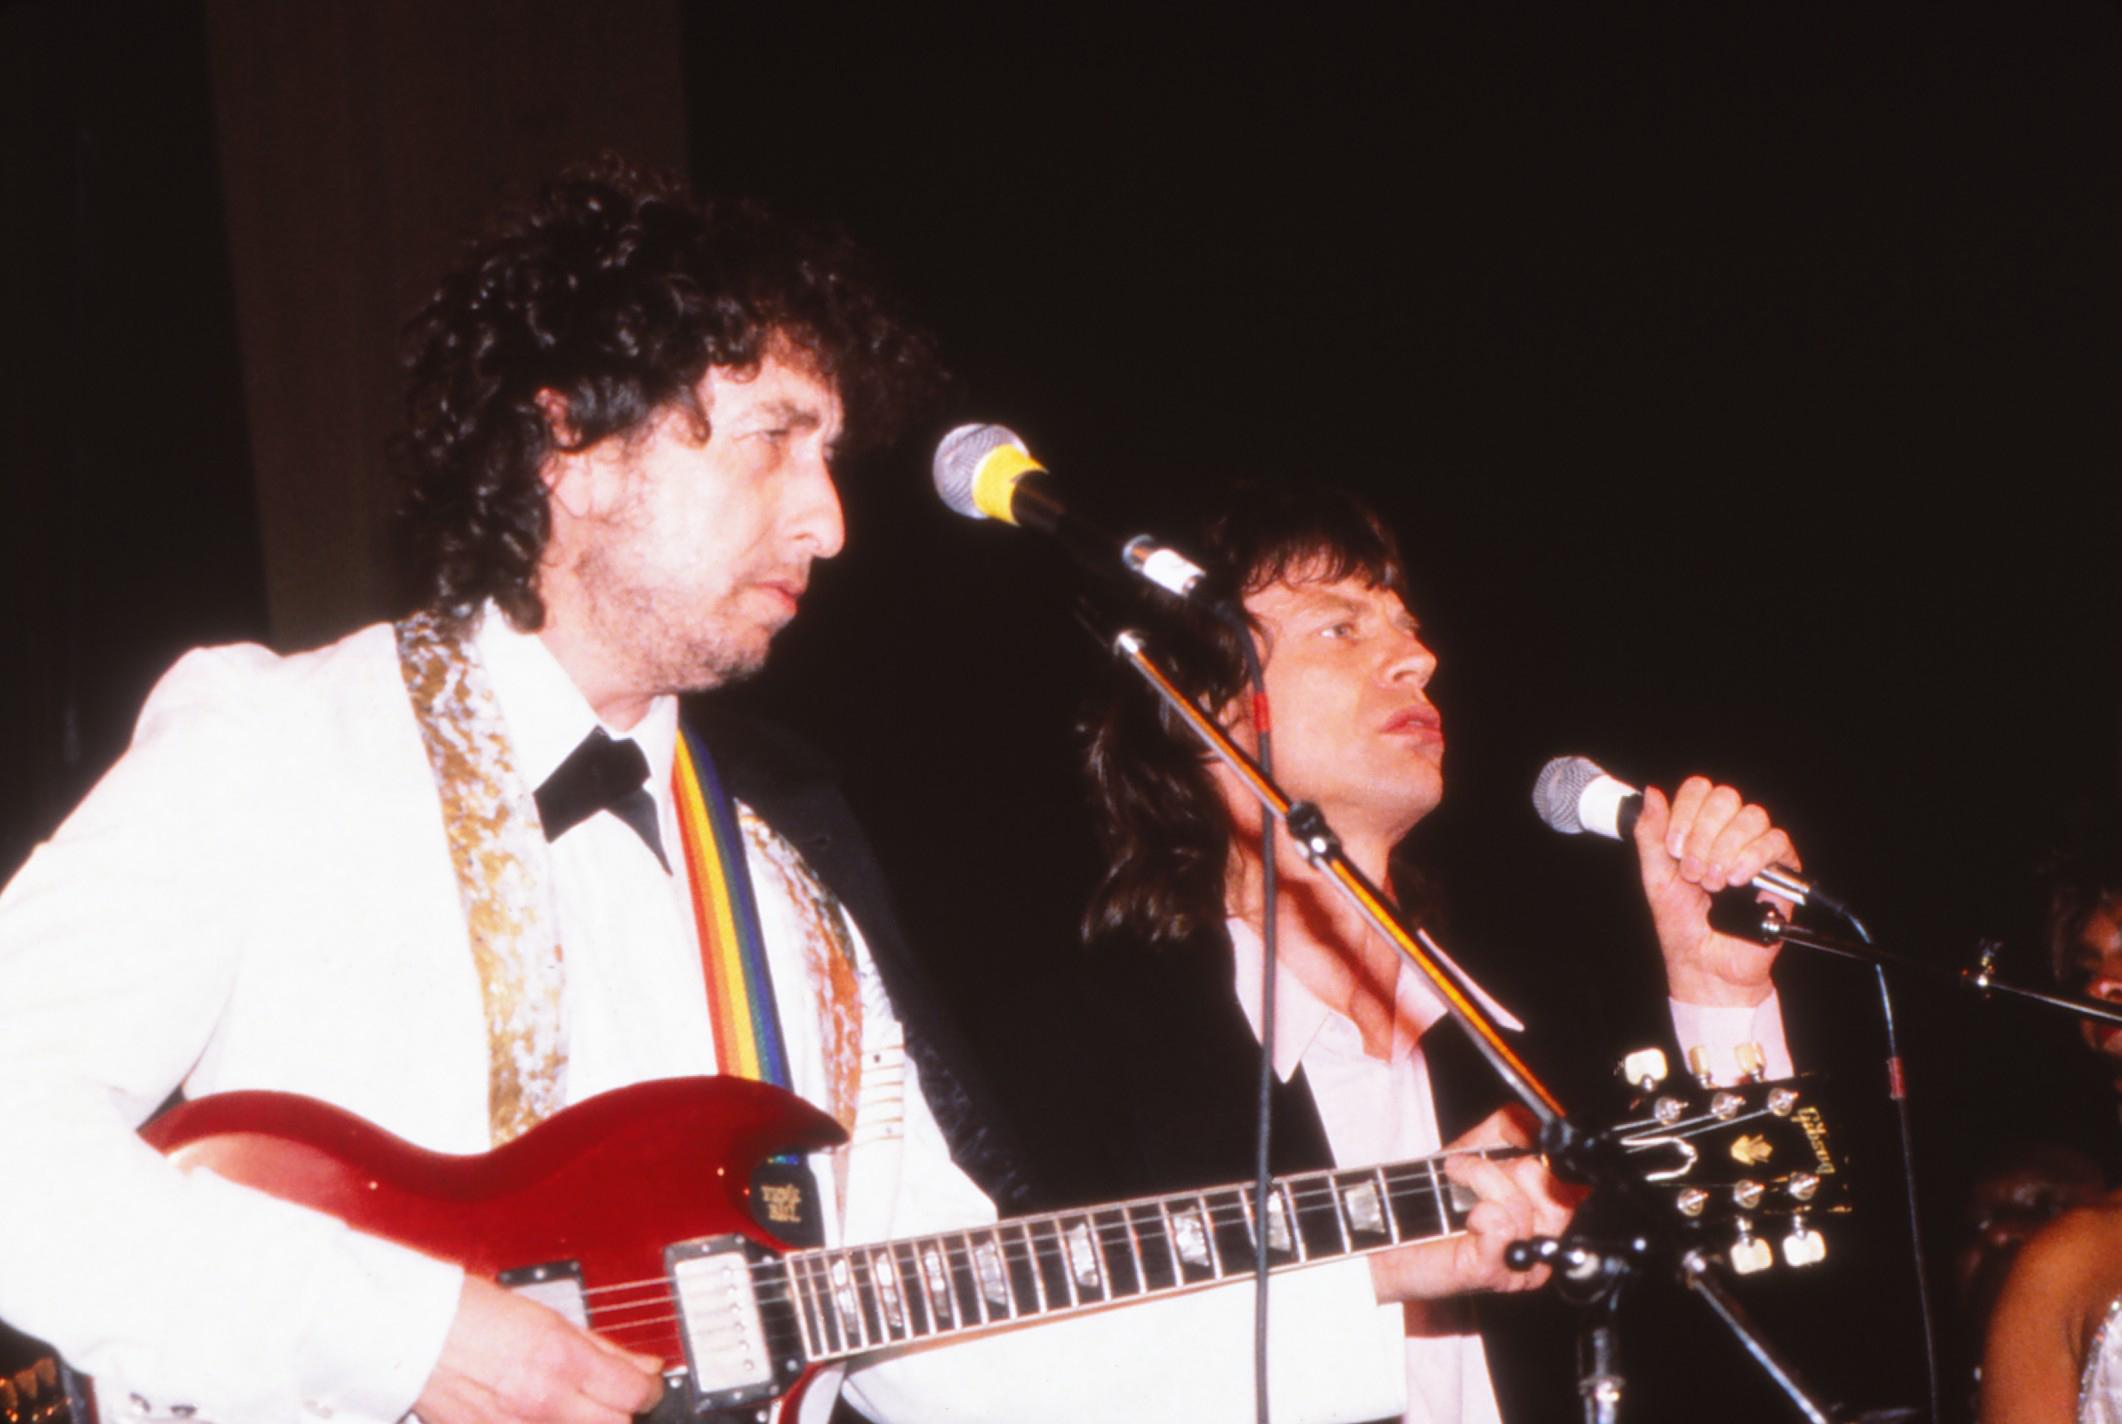 Unknown Portrait Photograph - Bob Dylan and Mick Jagger Performing Together Fine Art Print